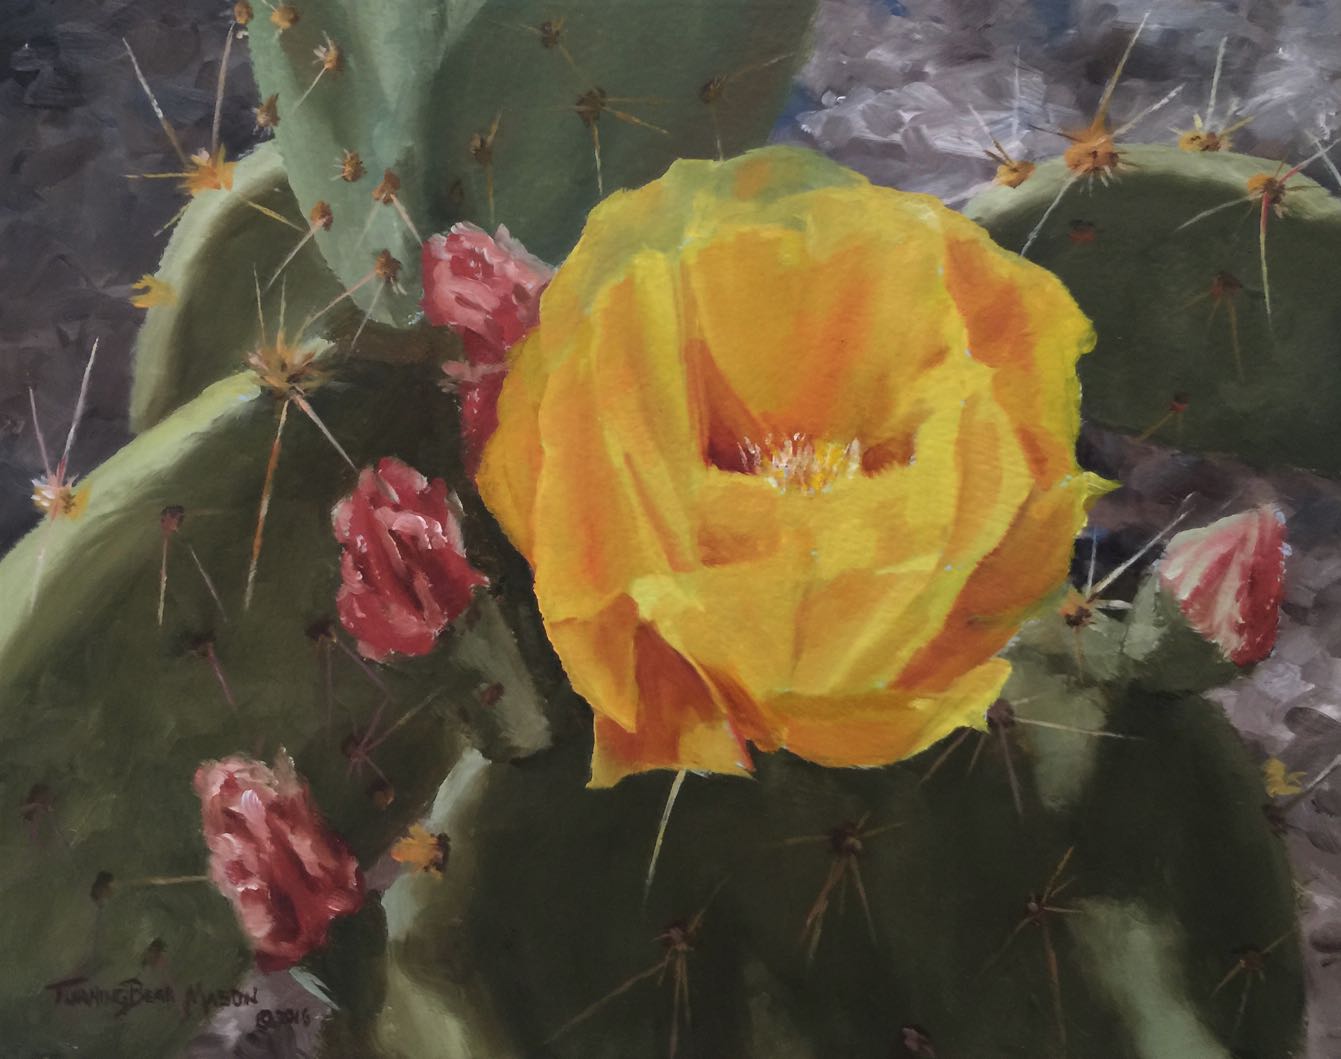 Blooming Prickly Pear 8x10"